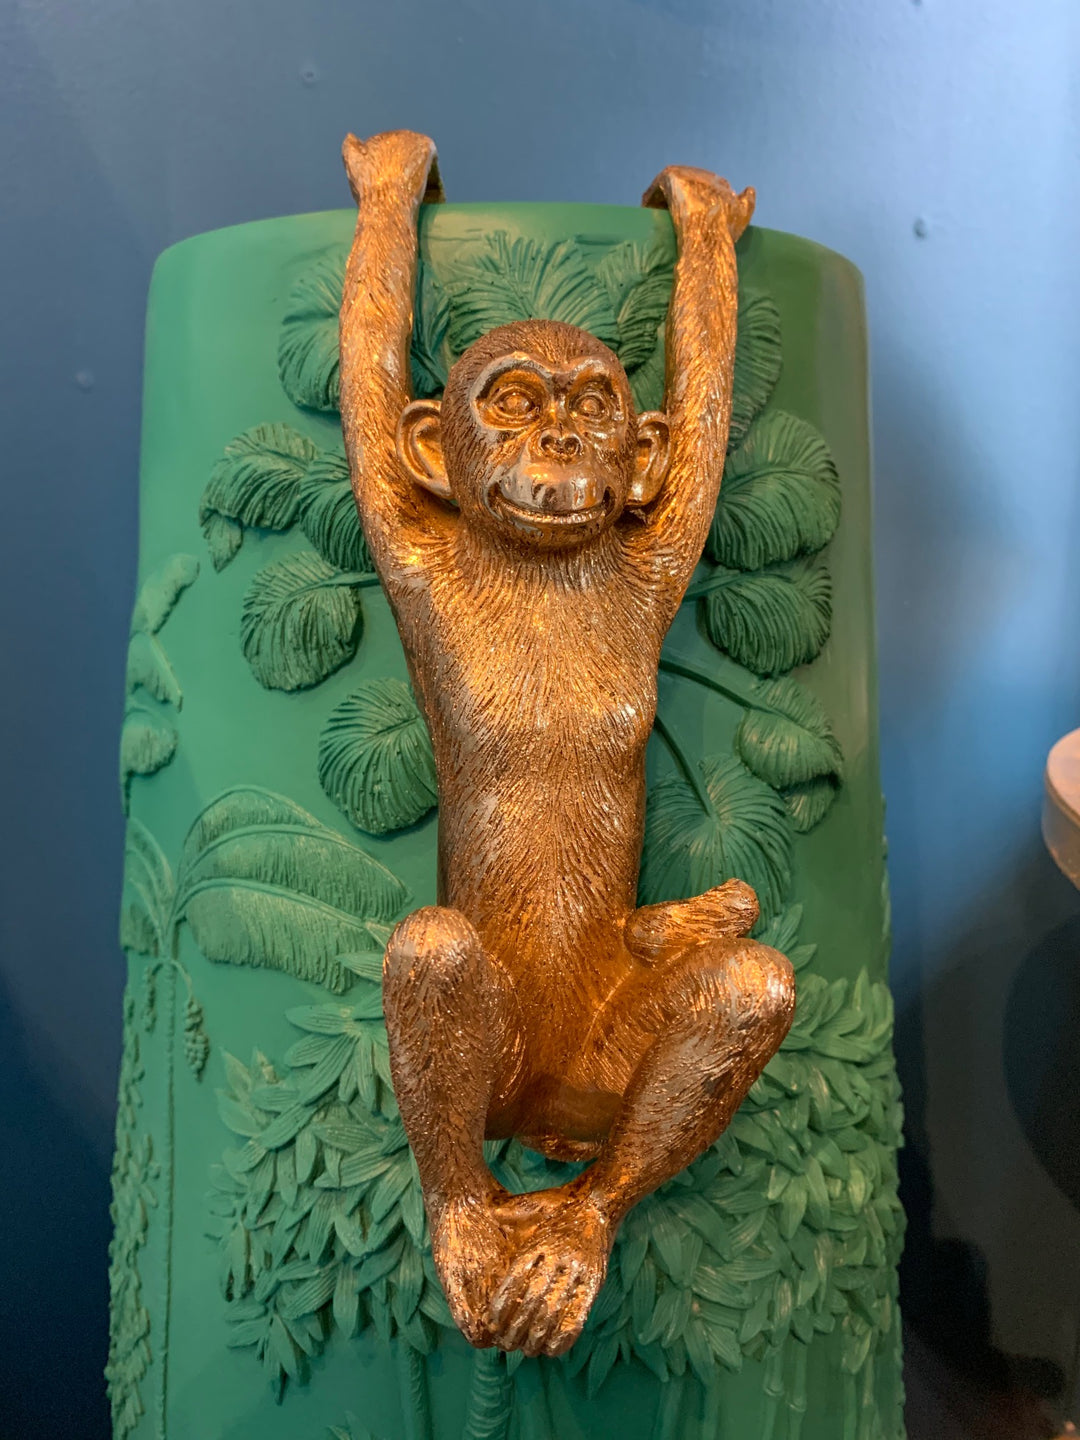 Hand painted gold monkey sculpture